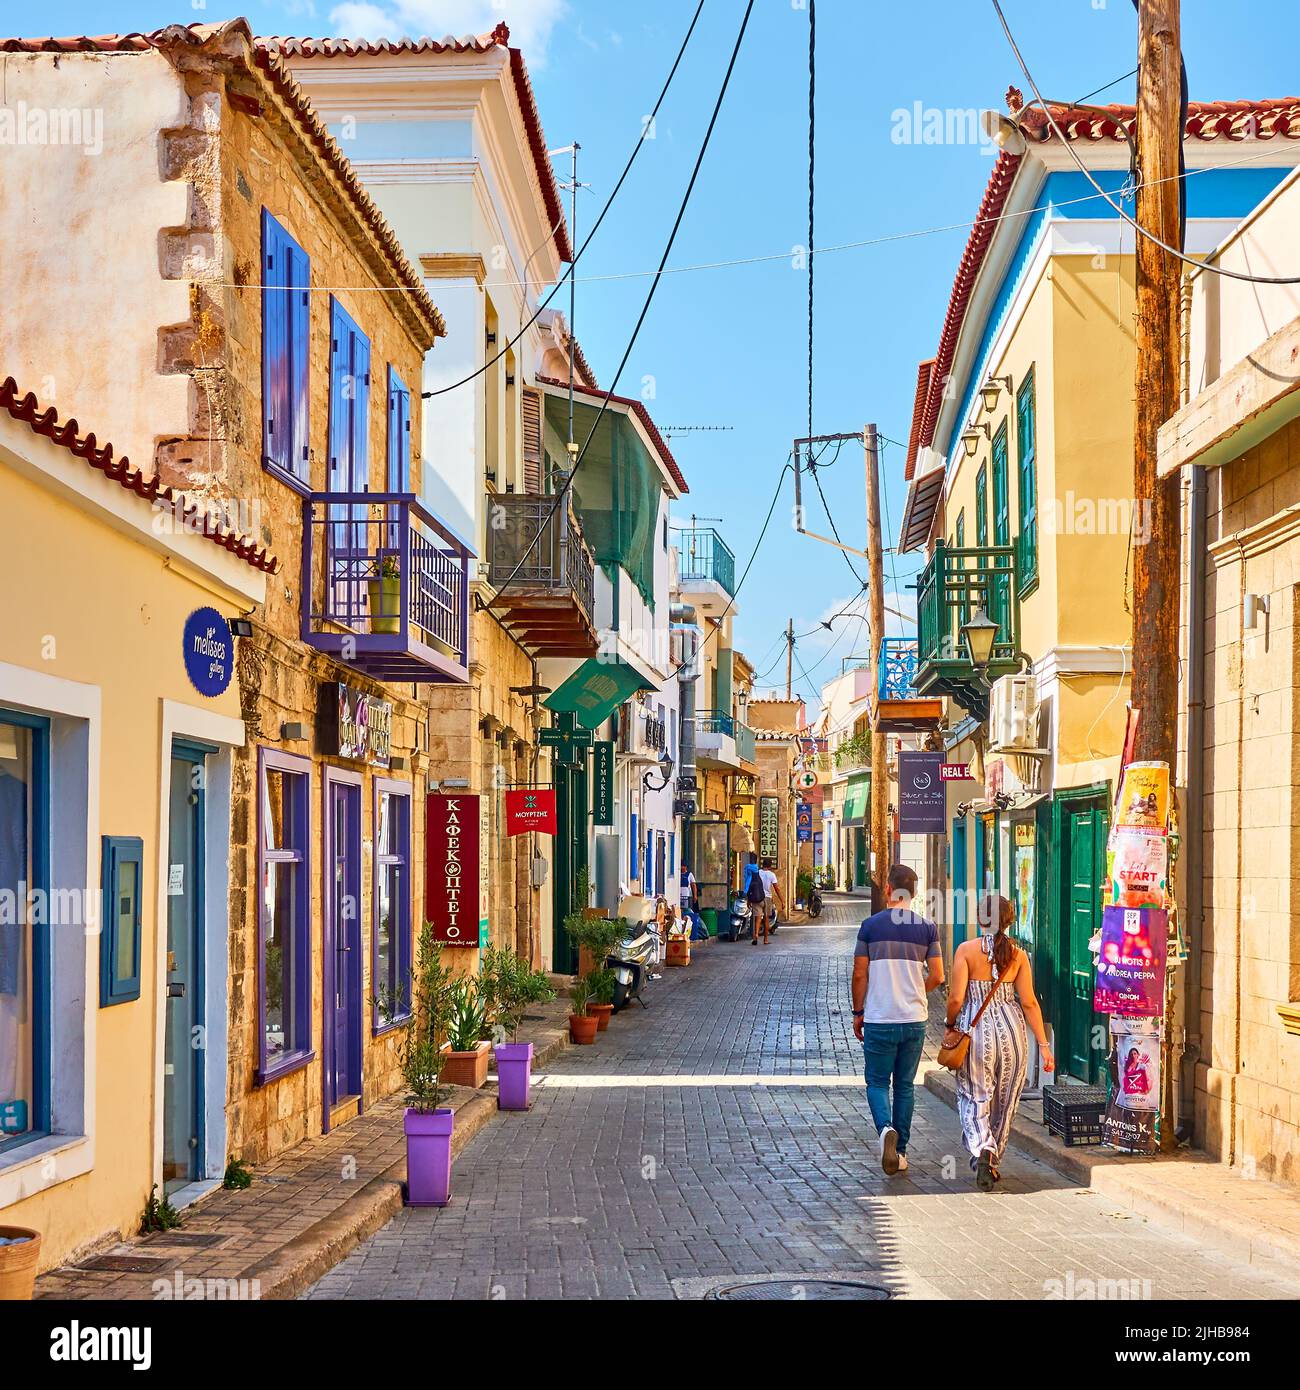 Aegina, Greece  - September 13, 2019: Perspective of typical street in Aegina town Stock Photo